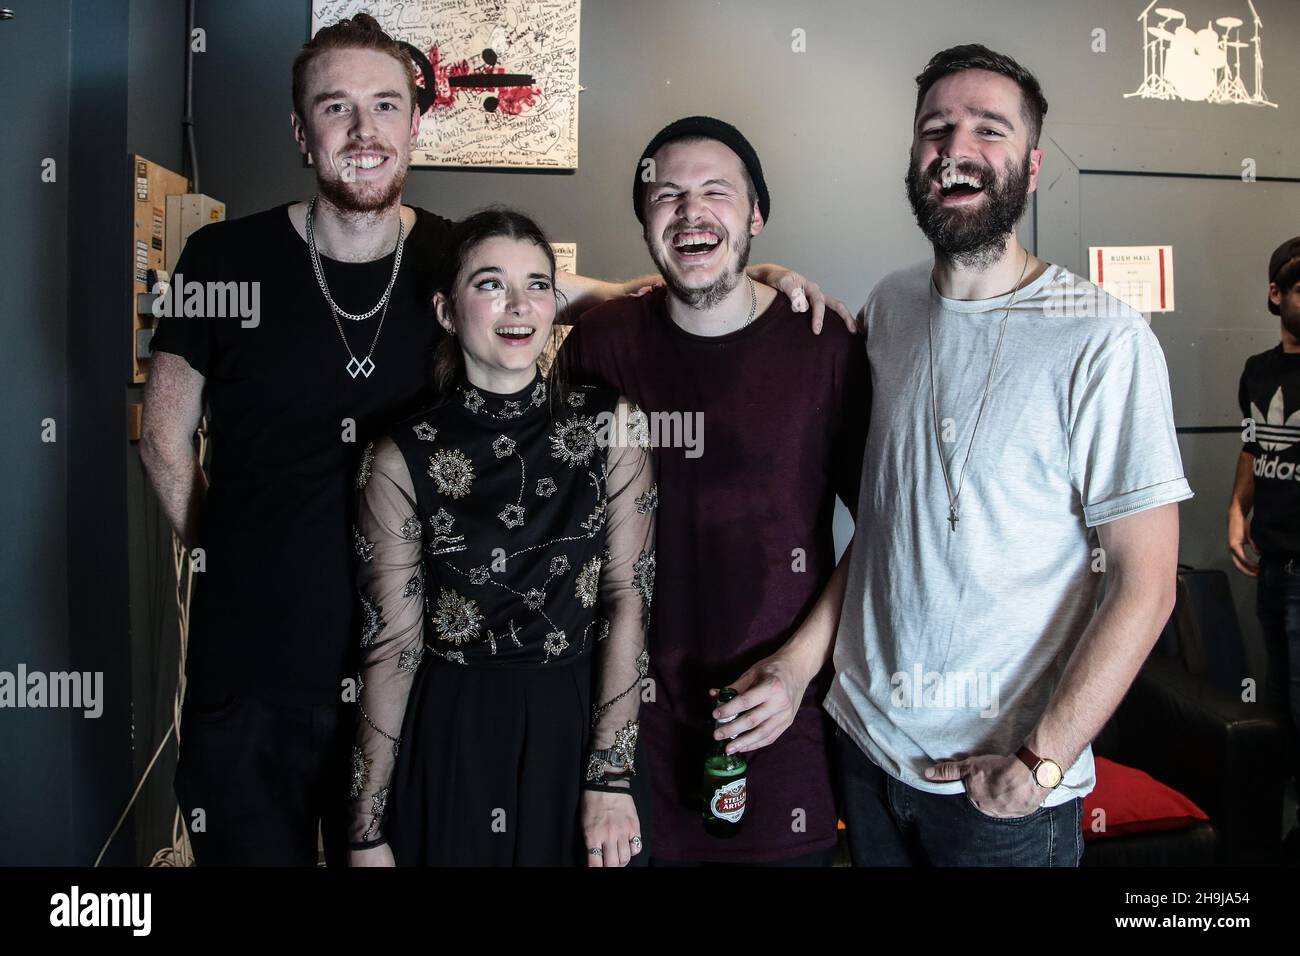 Mt Wolf pose for photos back stage after performing at Bush Hall in (female name not given) Stevie Red McMinn, Mitchell, Sebastian Fox 'Bassi' Stock Photo Alamy